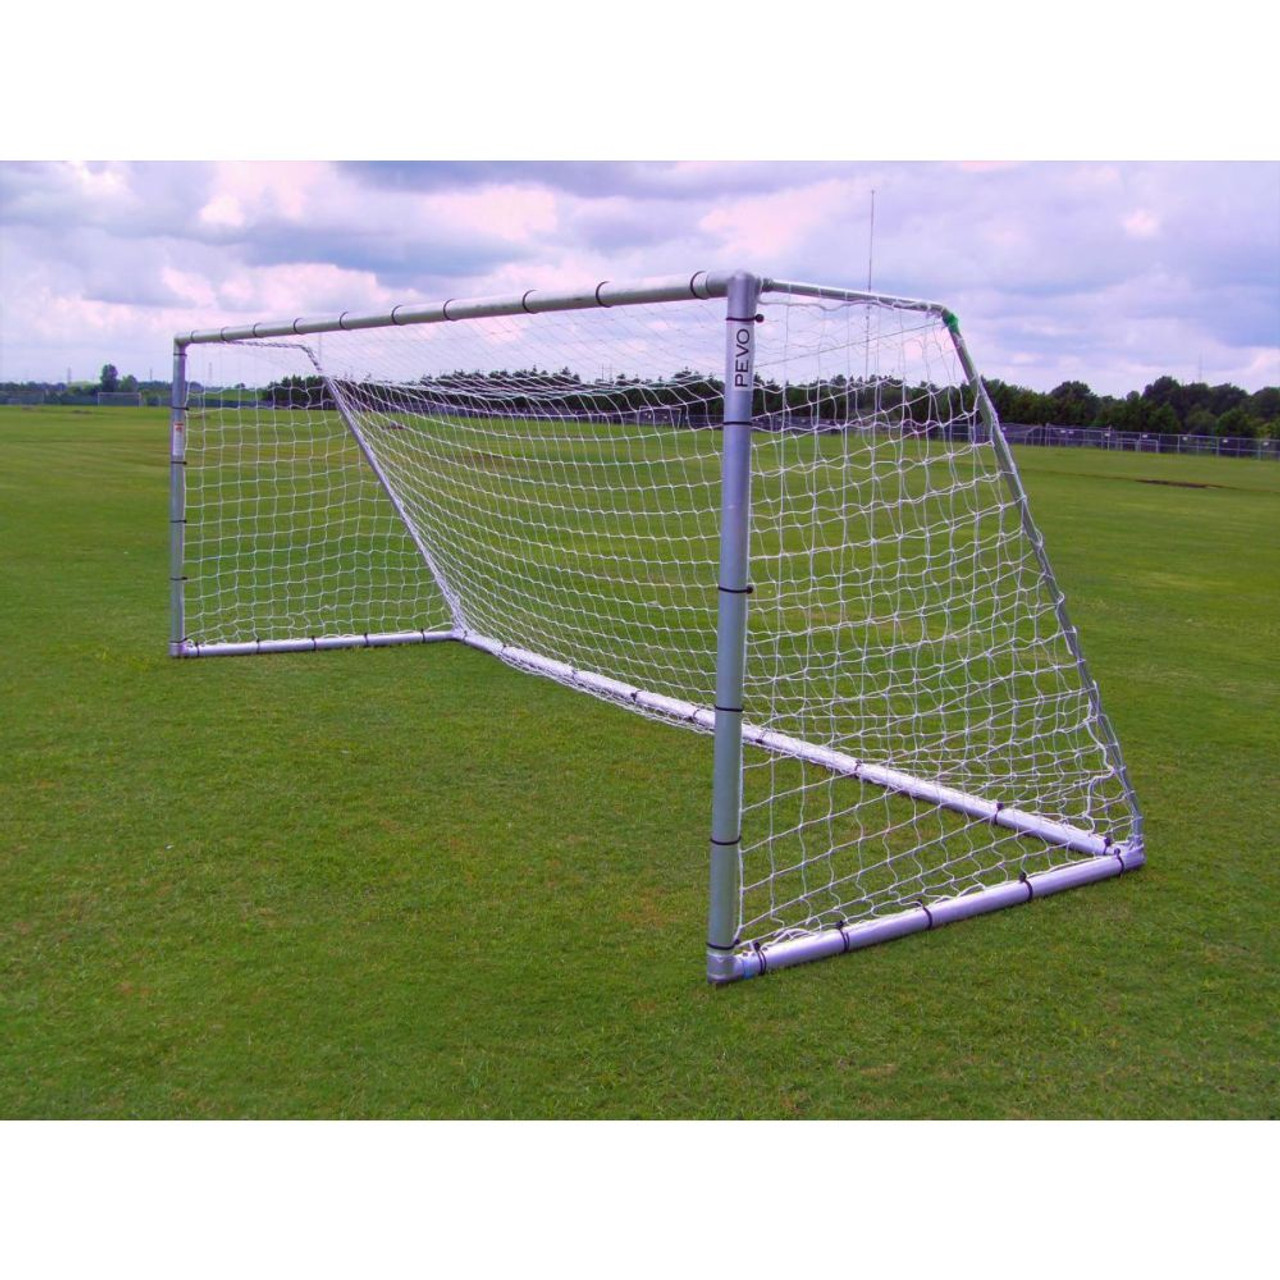 Economy Series Youth Soccer Goal 6.5' x 18.5'